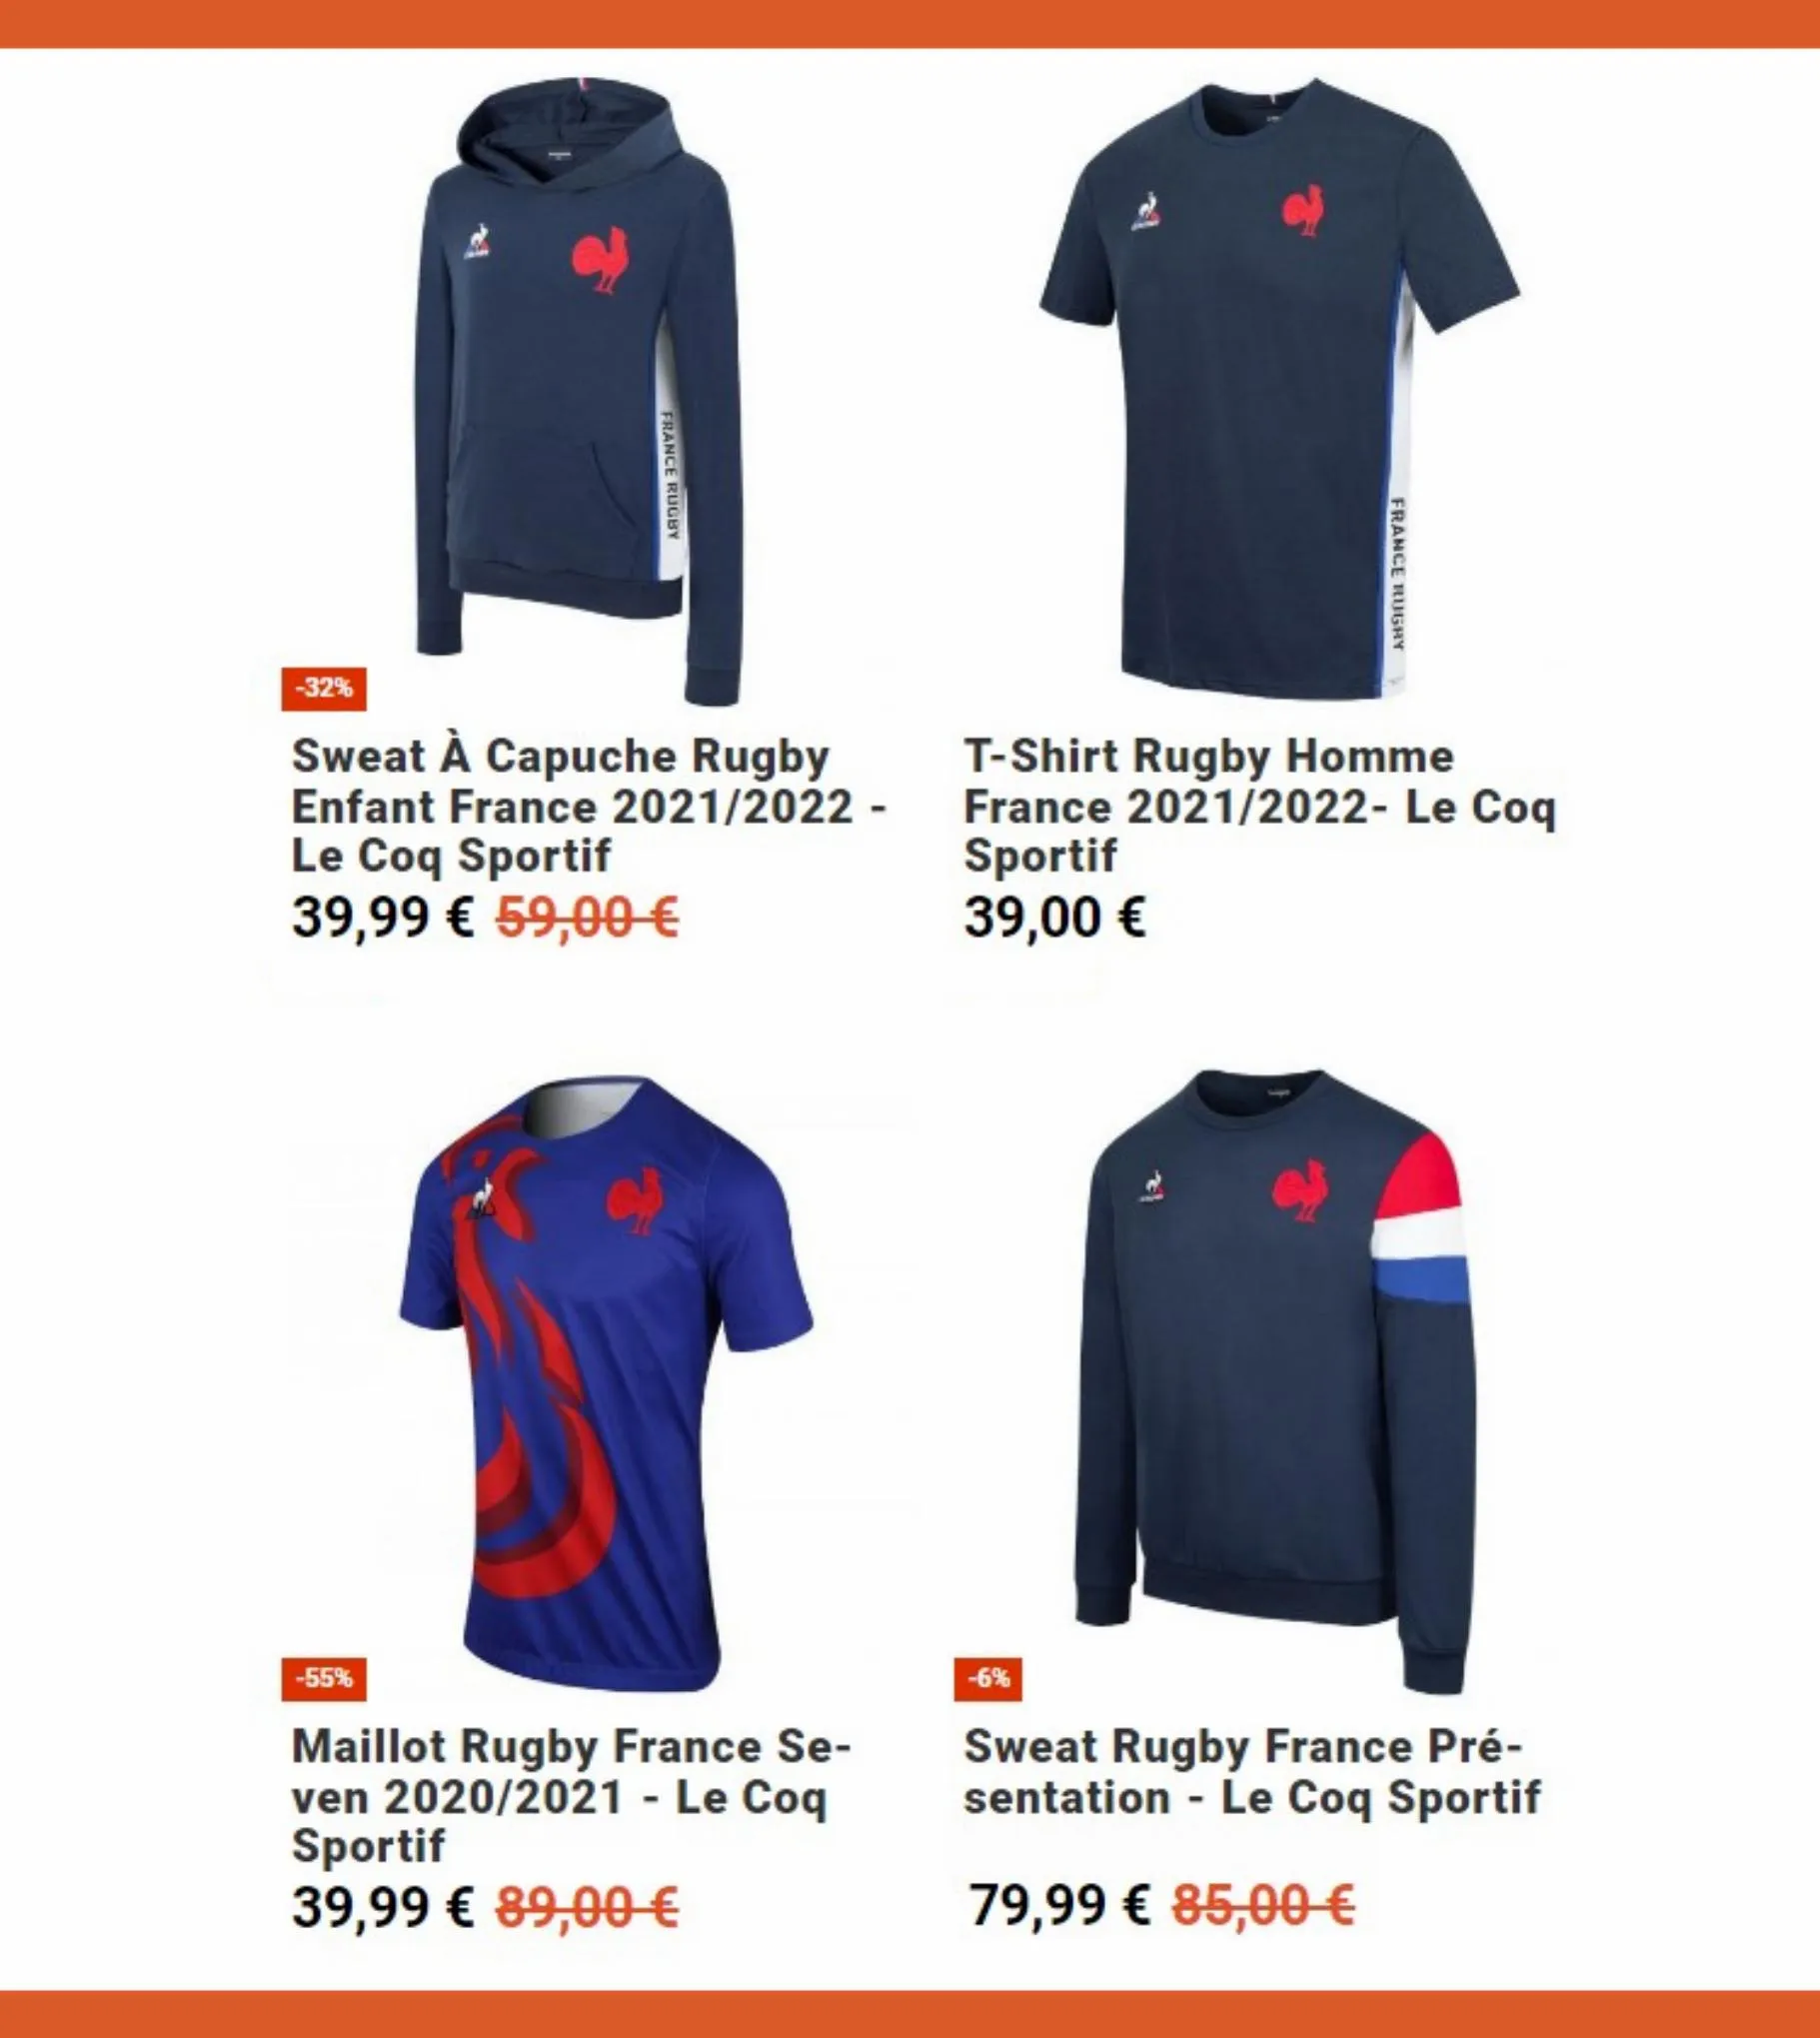 Catalogue Promotions France 2022, page 00002